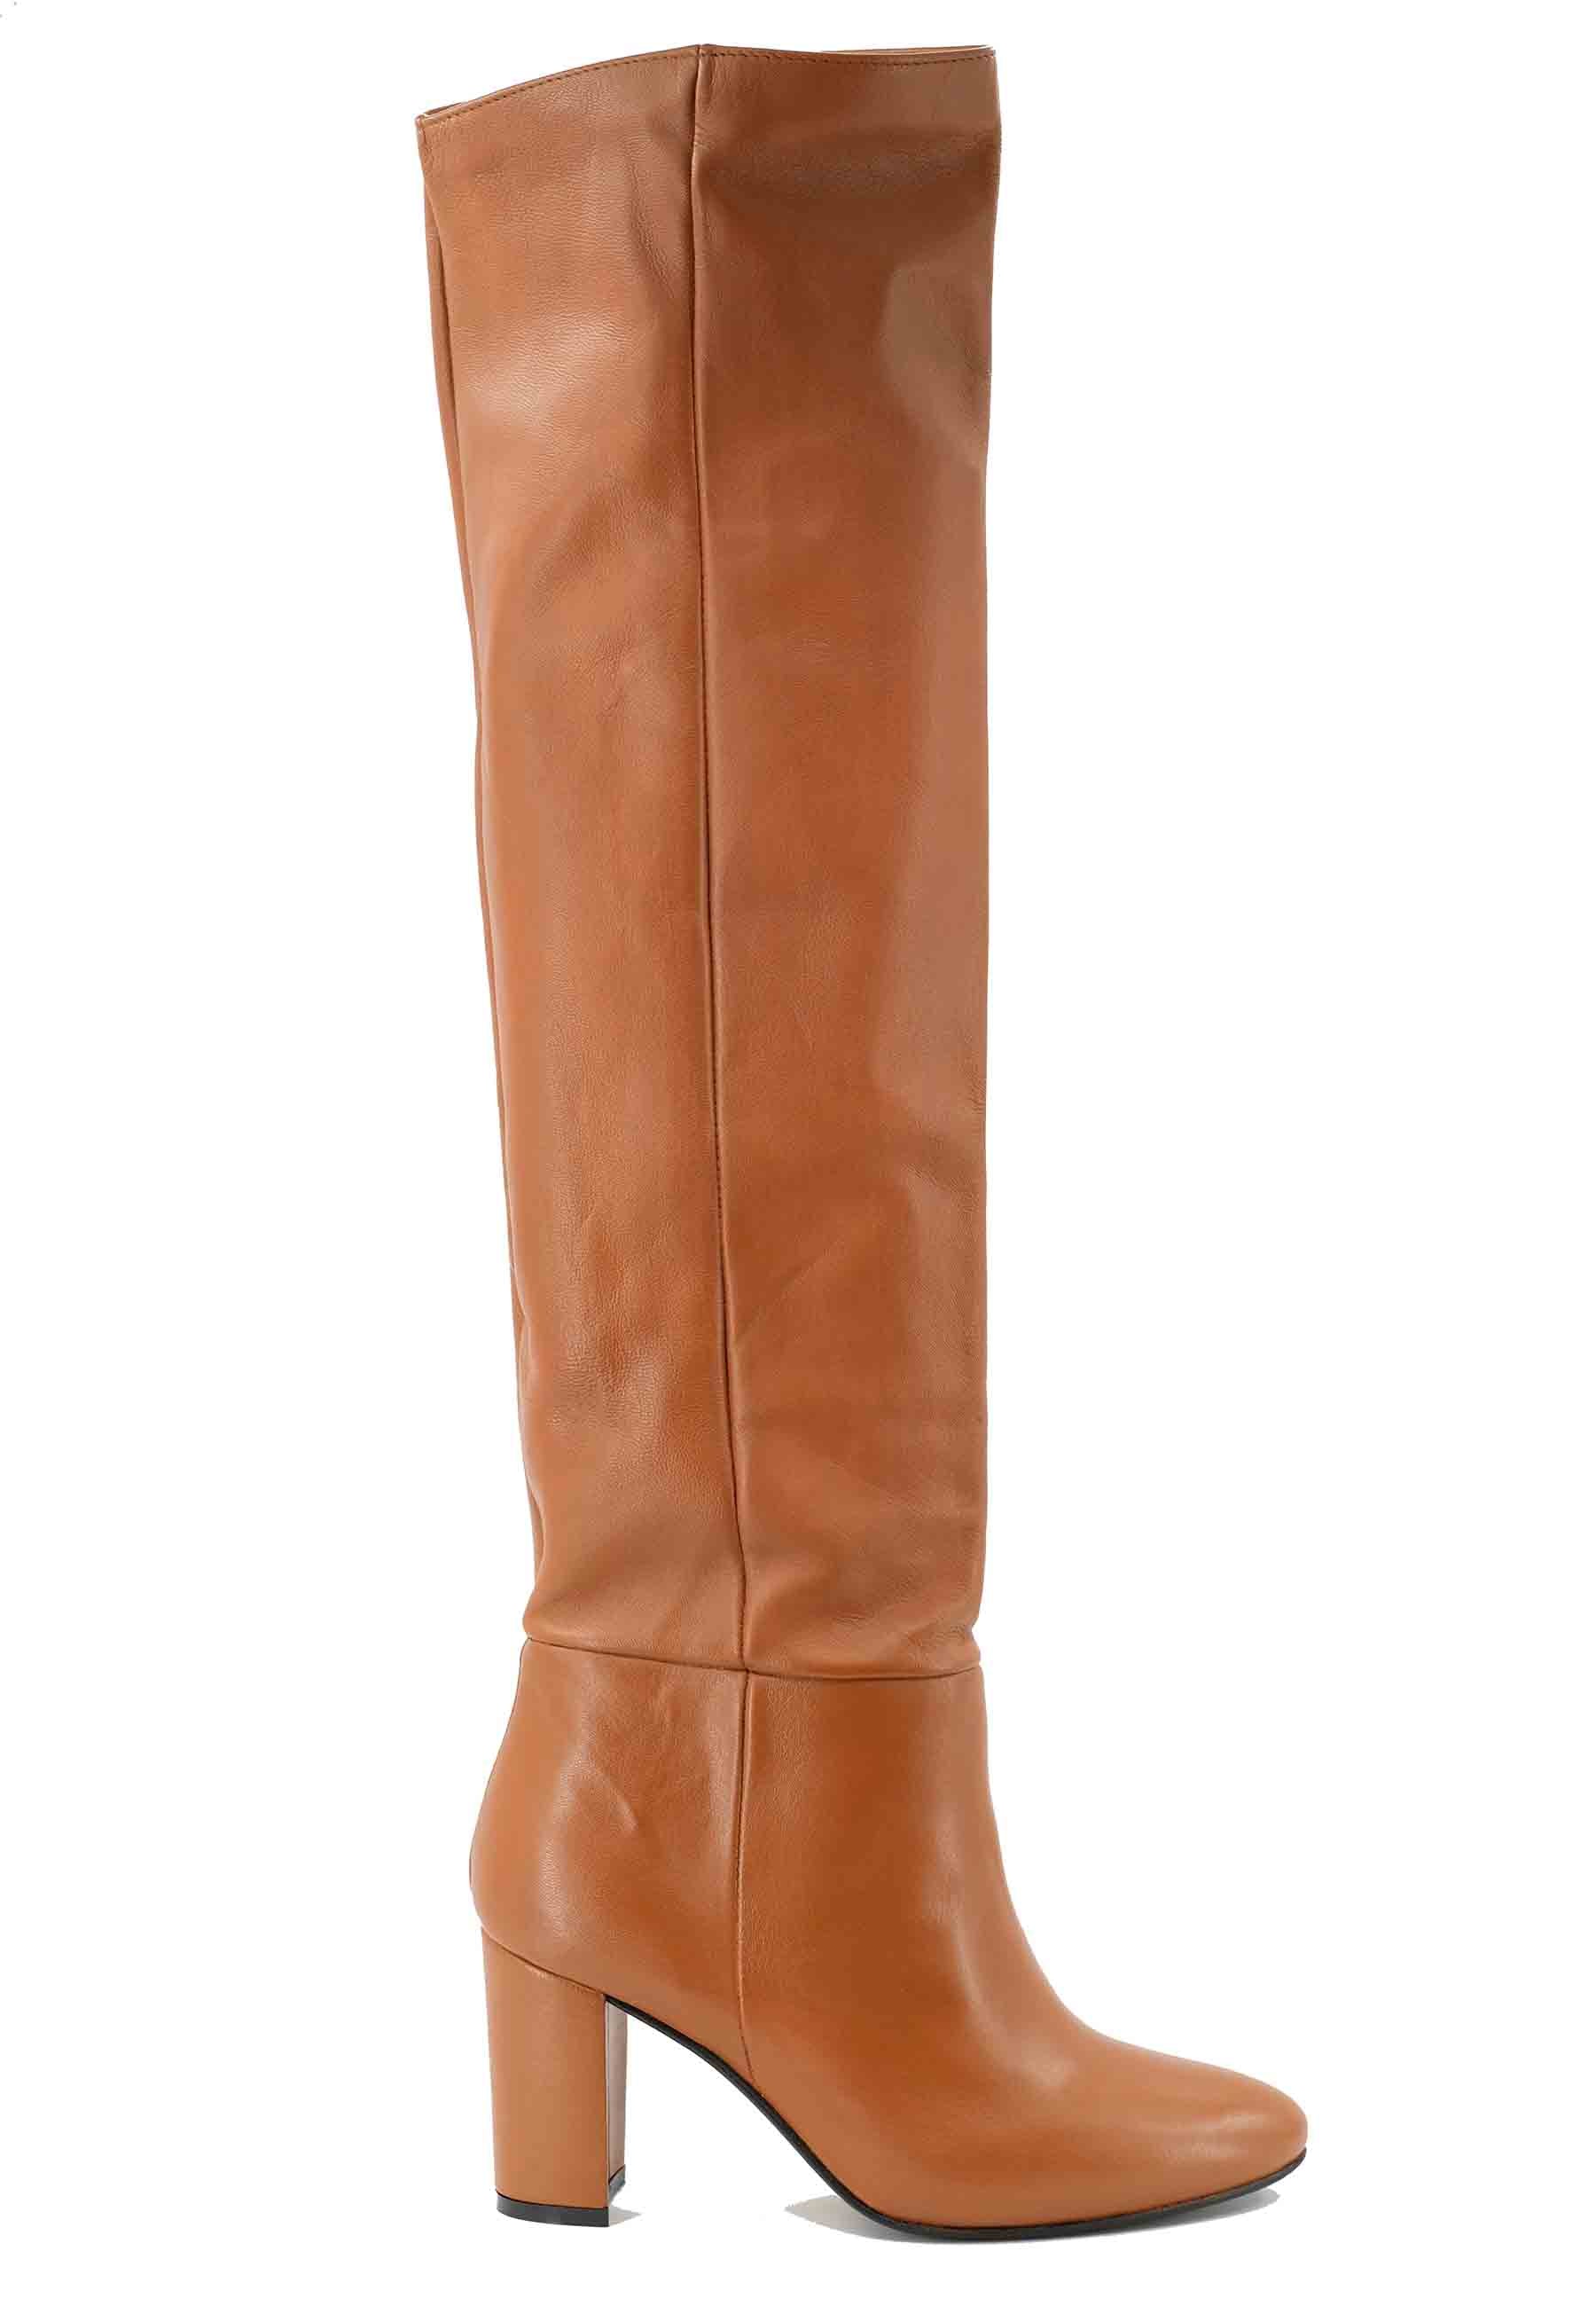 ST1591 tube boots in tan leather with covered heel and round toe